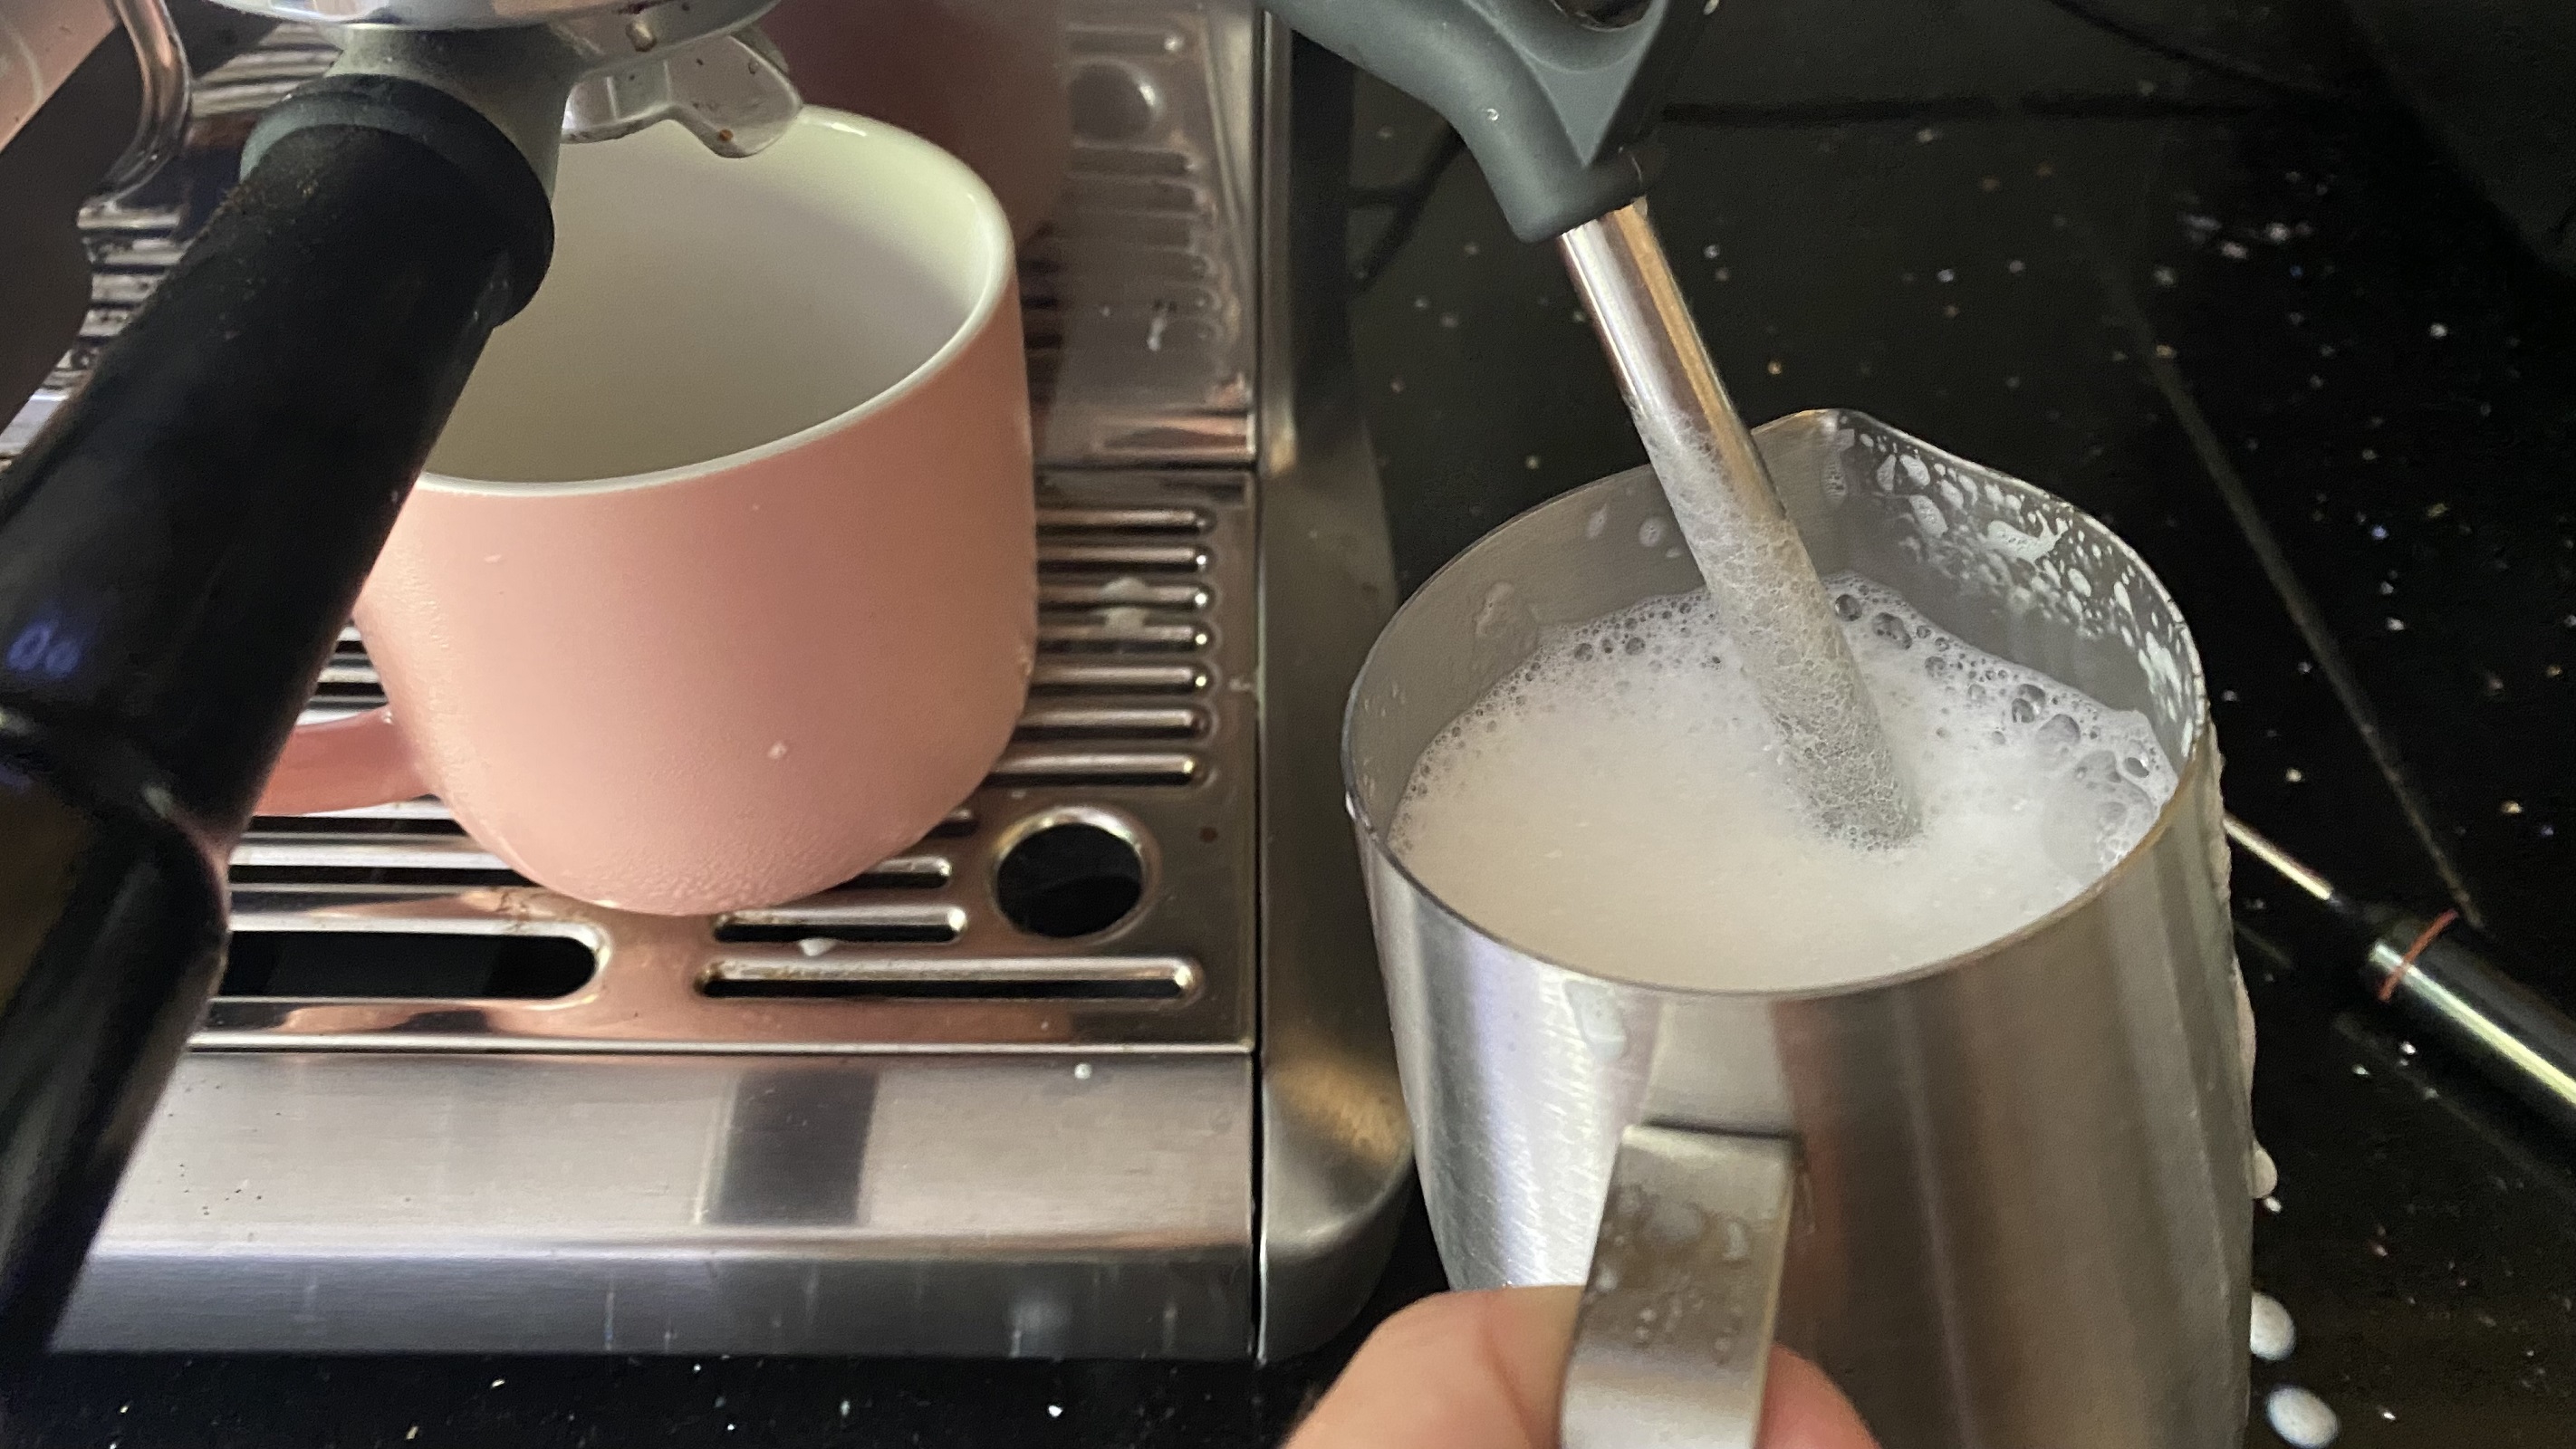 Using the steam wand on the Breville Barista Express Impress